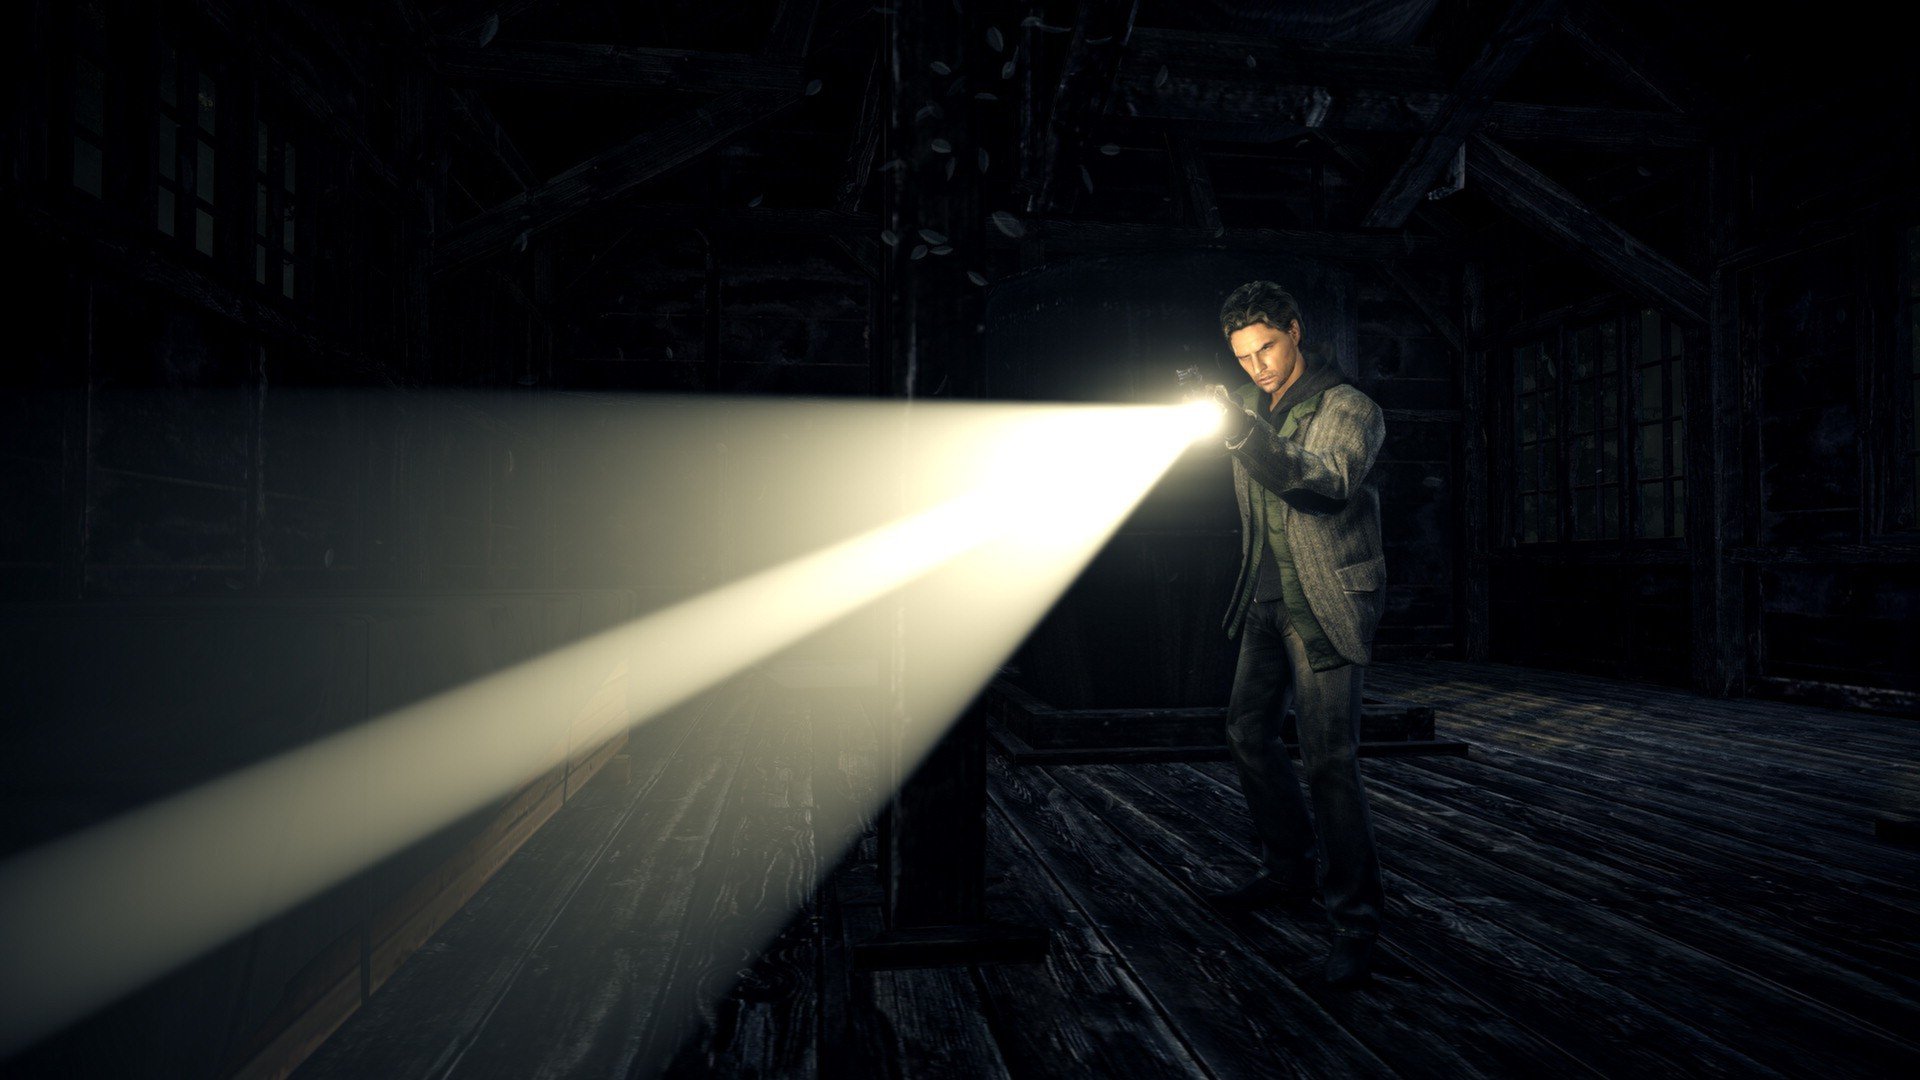 Stephen King gave the opening quote to Alan Wake for just one